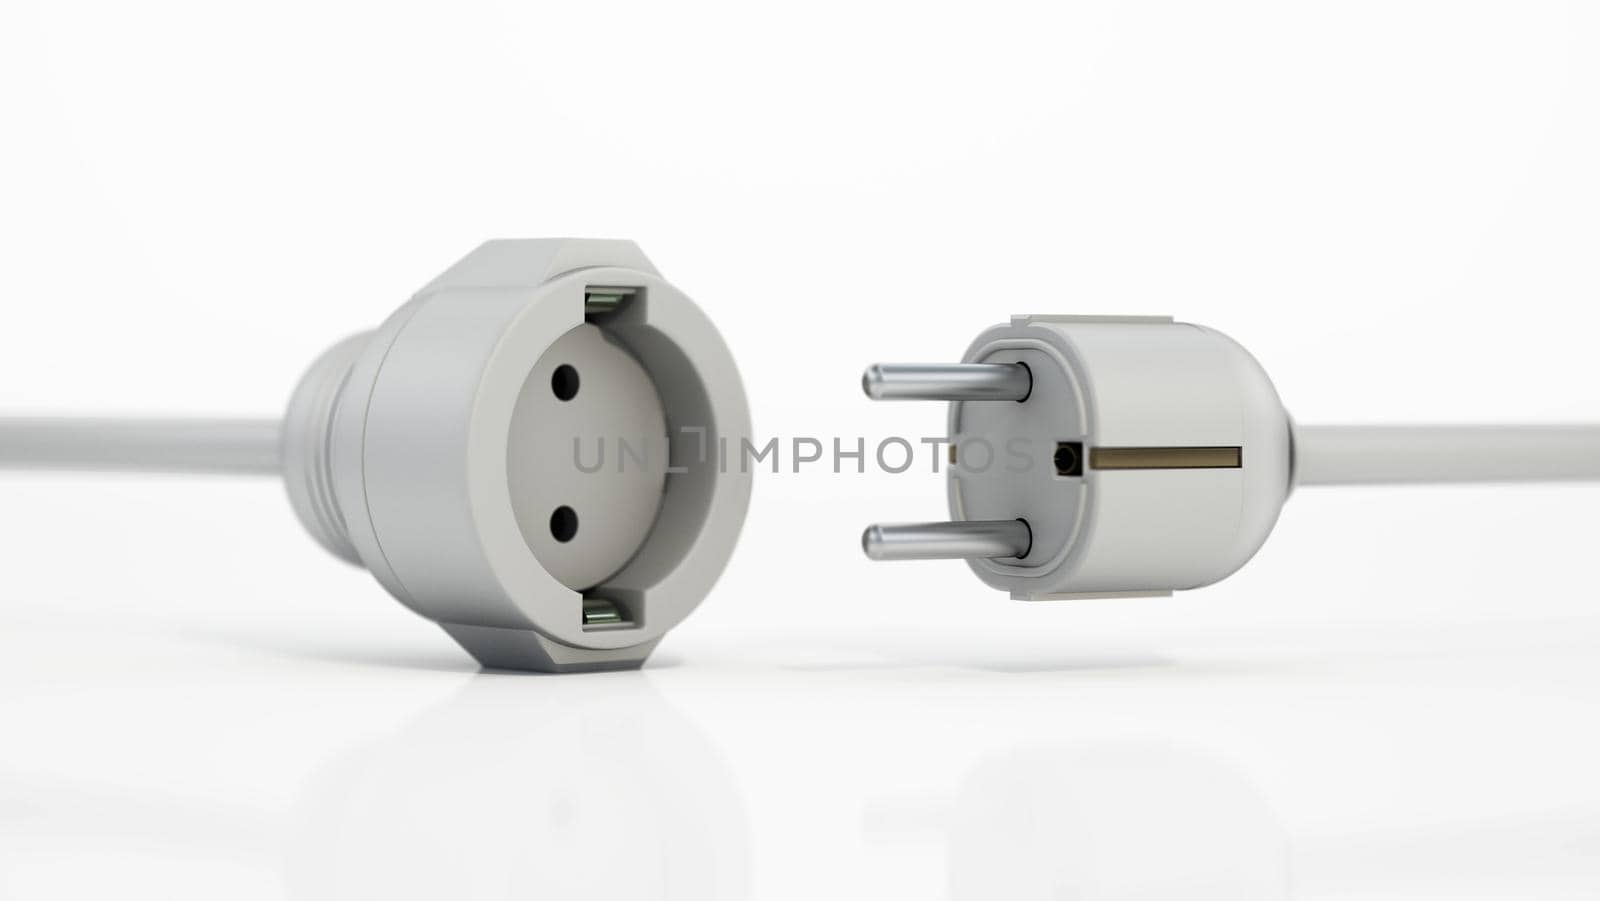 Electric plug and power socket isolated on white background. 3D illustration.